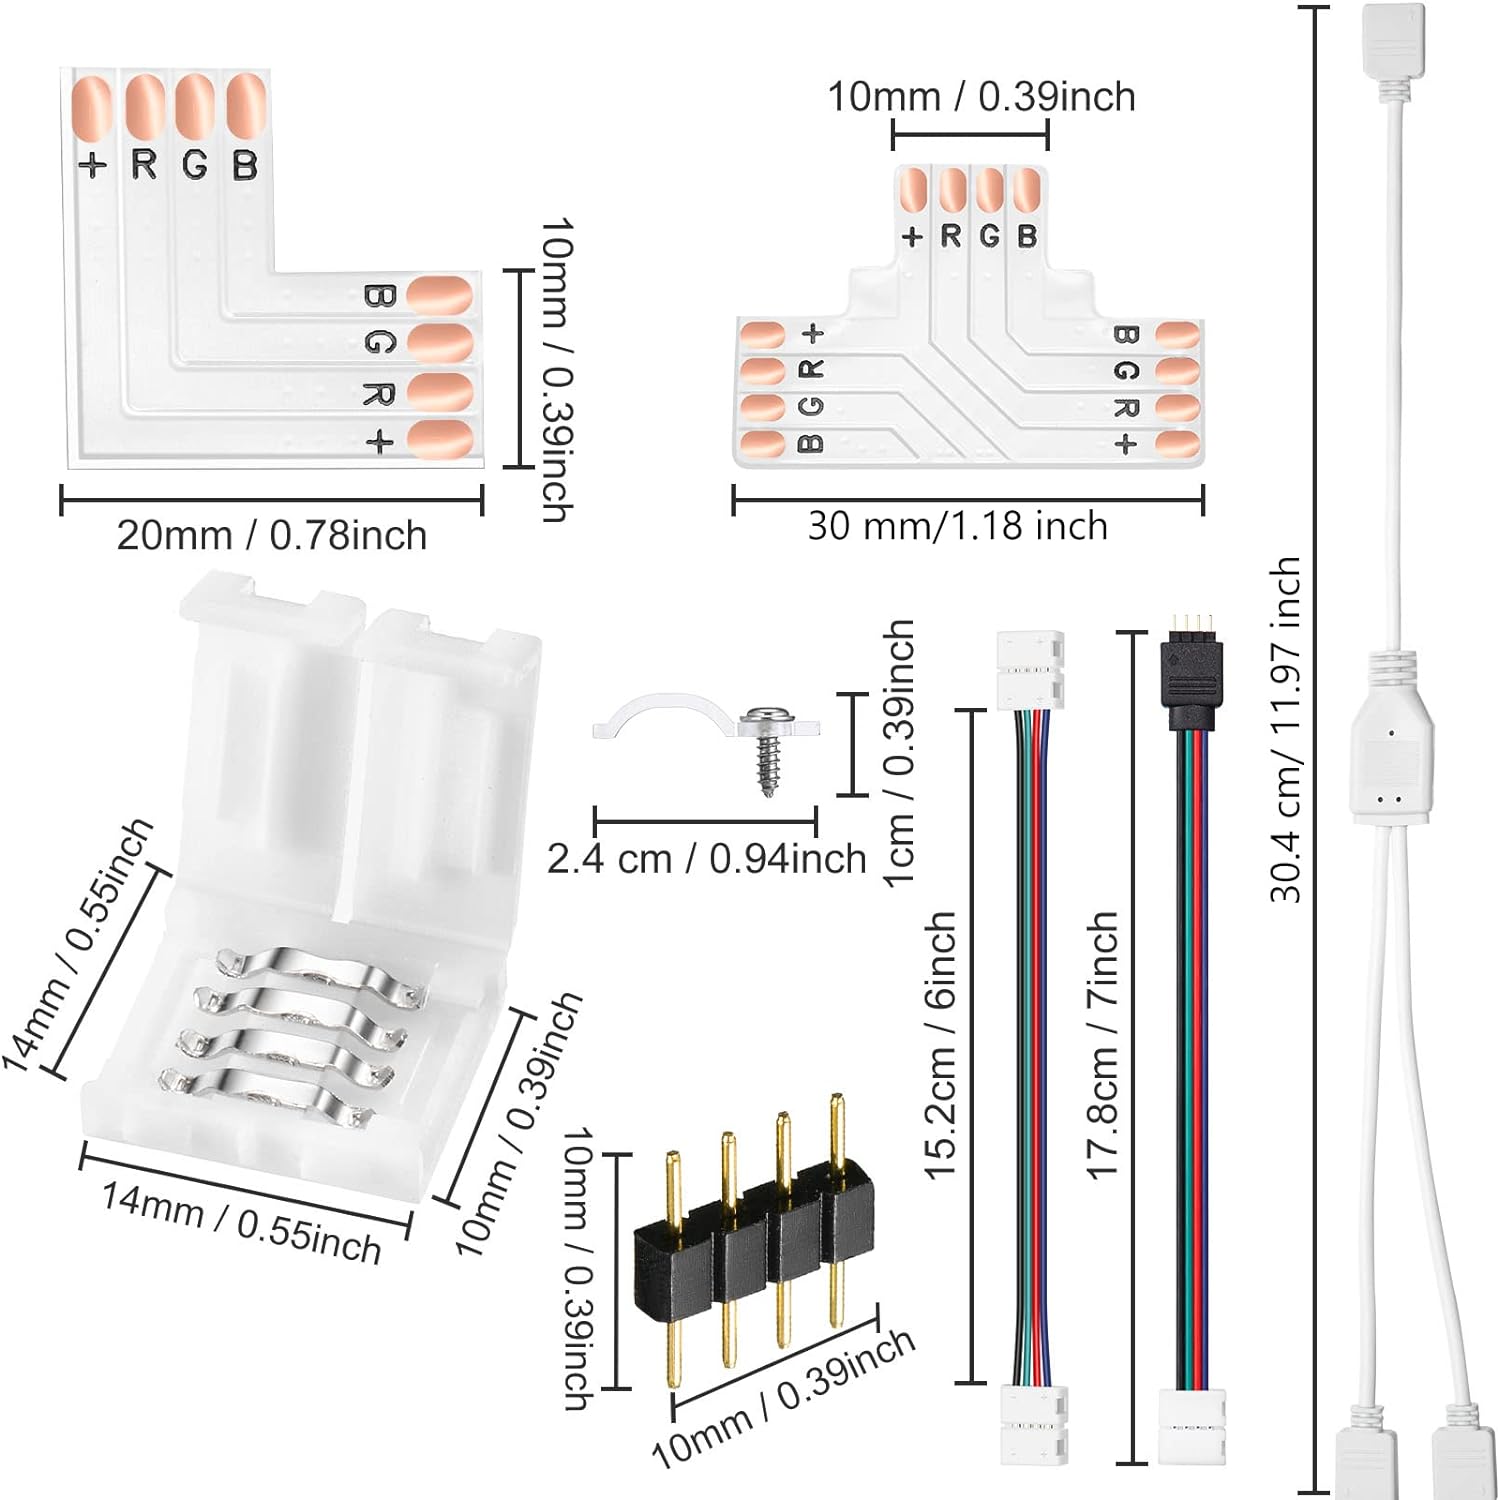 5050 4 Pin RGB 10mm LED Strip Connector Kit RGB Extension Cable, LED Strip Jumper, 2 Way RGB Splitter Cable, L Connectors, T Connector, Gapless Connectors, 4 Pin Male Connector, LED Strip Clips